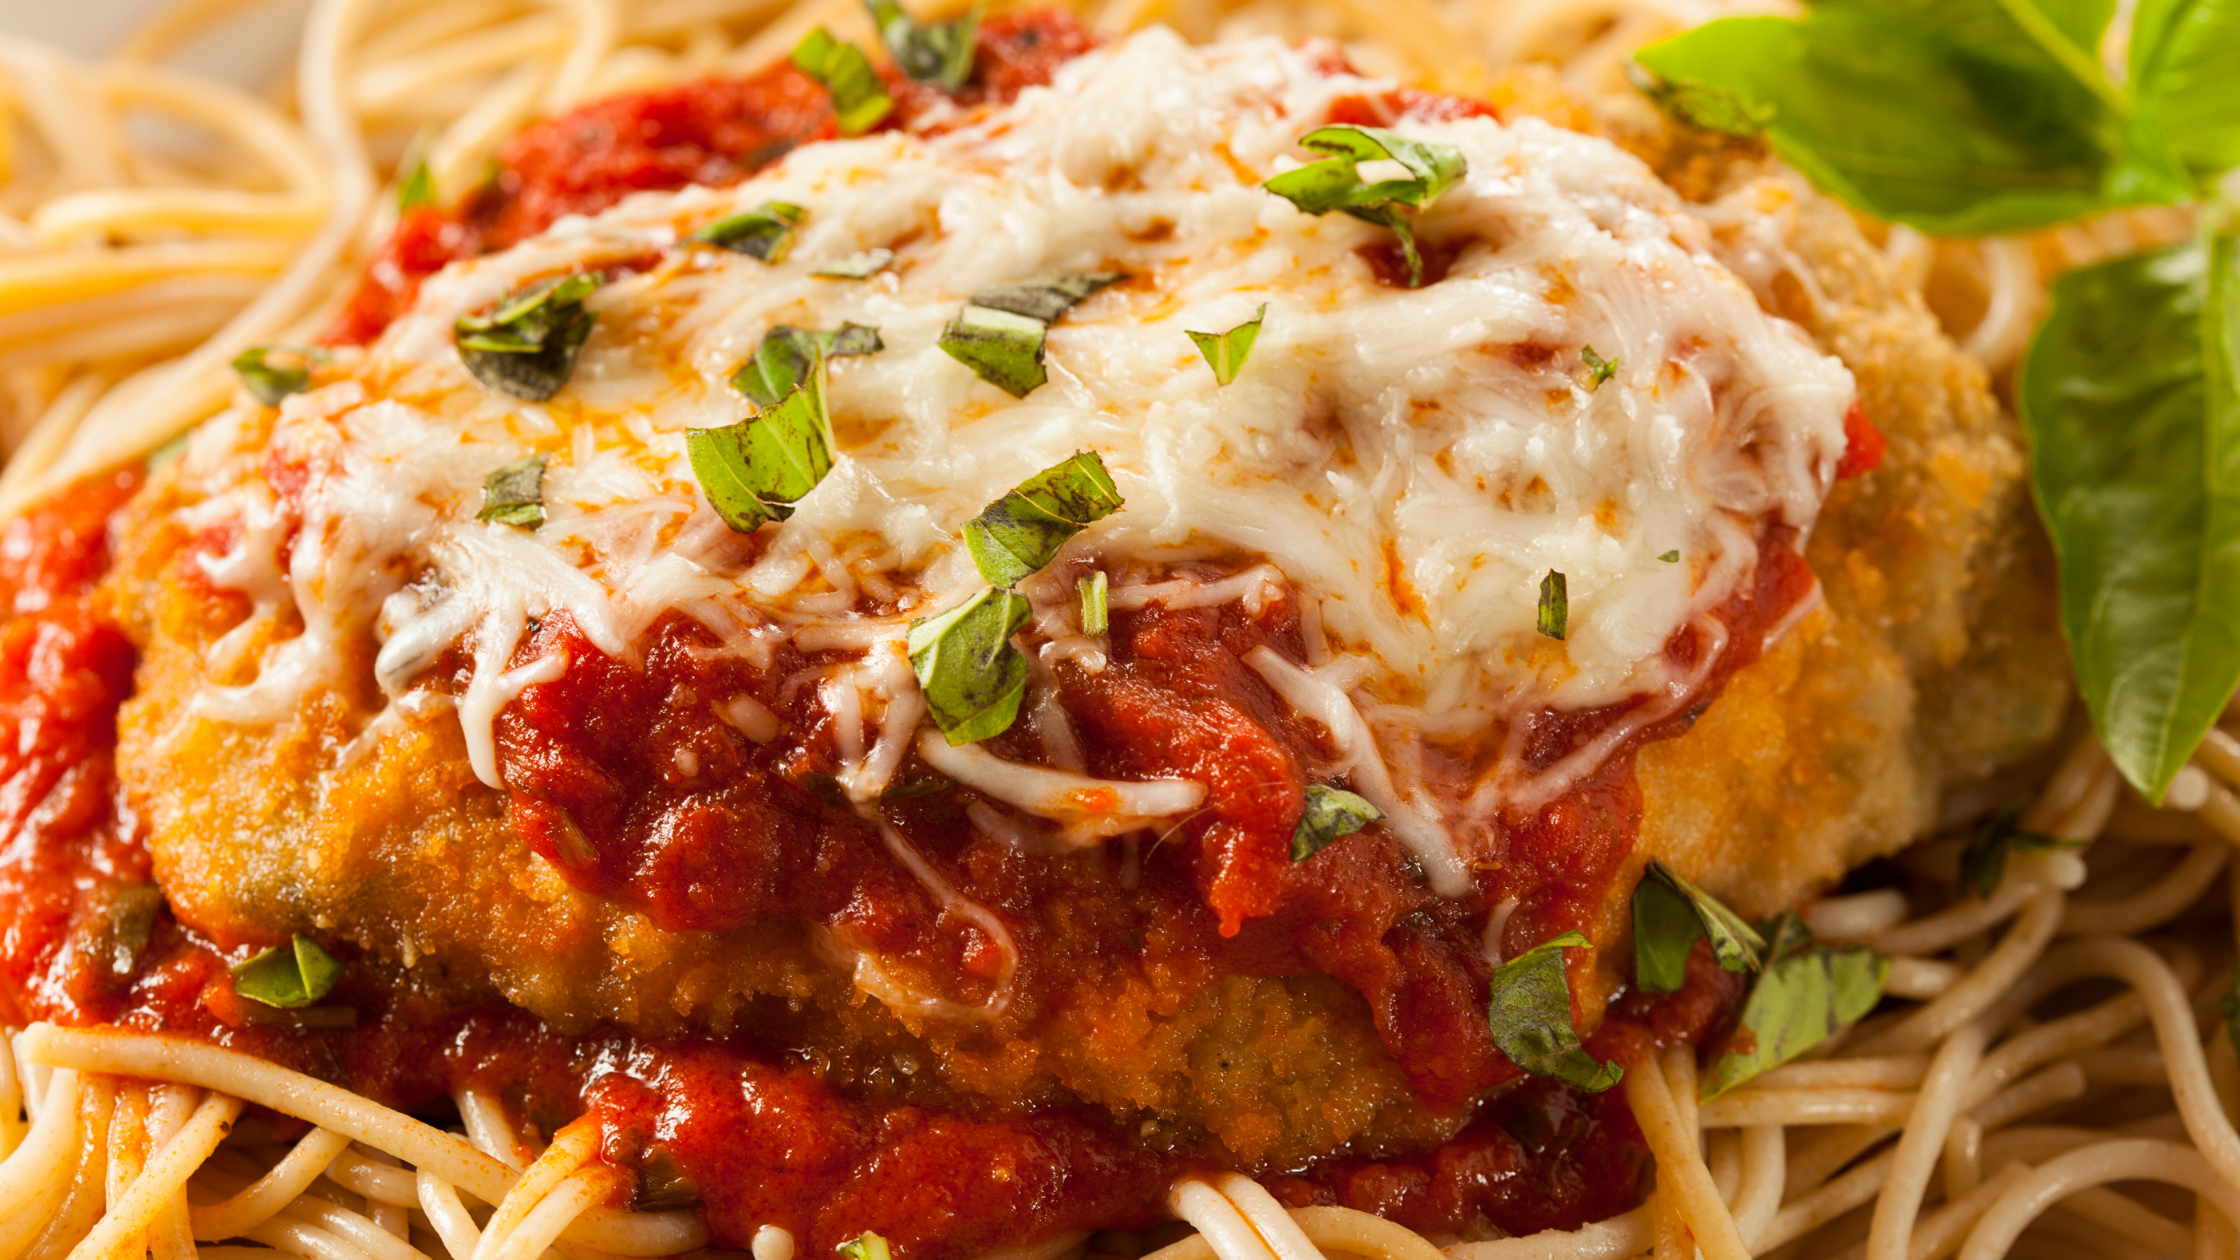 Low Calorie Chicken Parmesan with Whole Grain Spaghetti: A Healthy Recipe for Delicious Italian Food 6